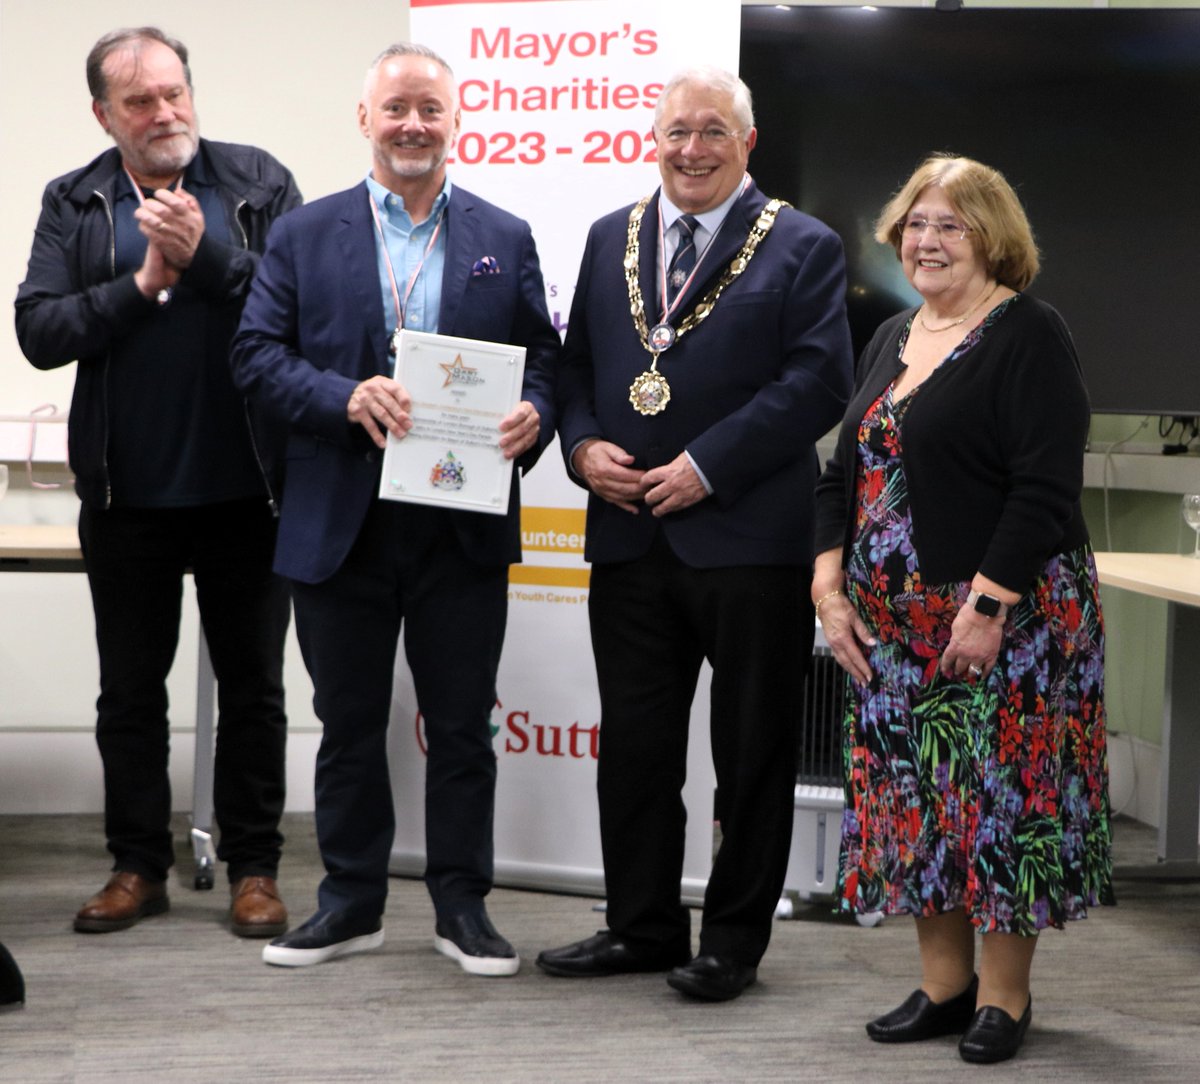 Thank you so much to Terry Goodwin, Managing Director of Conference Haul International for many years sponsorship of the London Borough of Sutton's entry to the London New Year's Day Parade raising an incredible £55,000 for the Mayor of Sutton's charities - thank you!